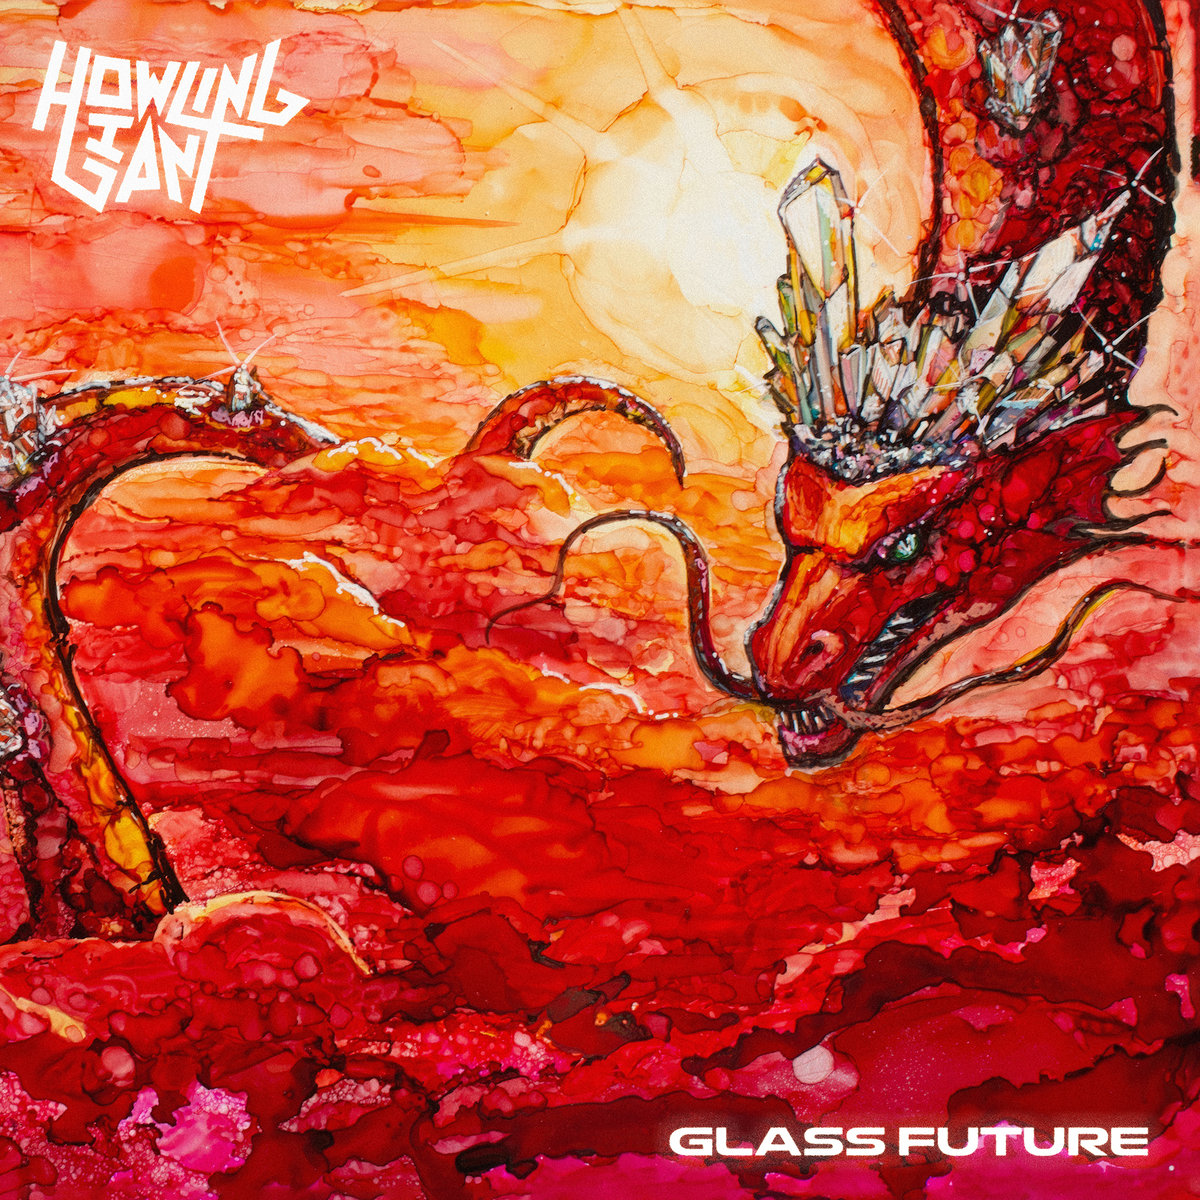 Howling Giant Glass Future